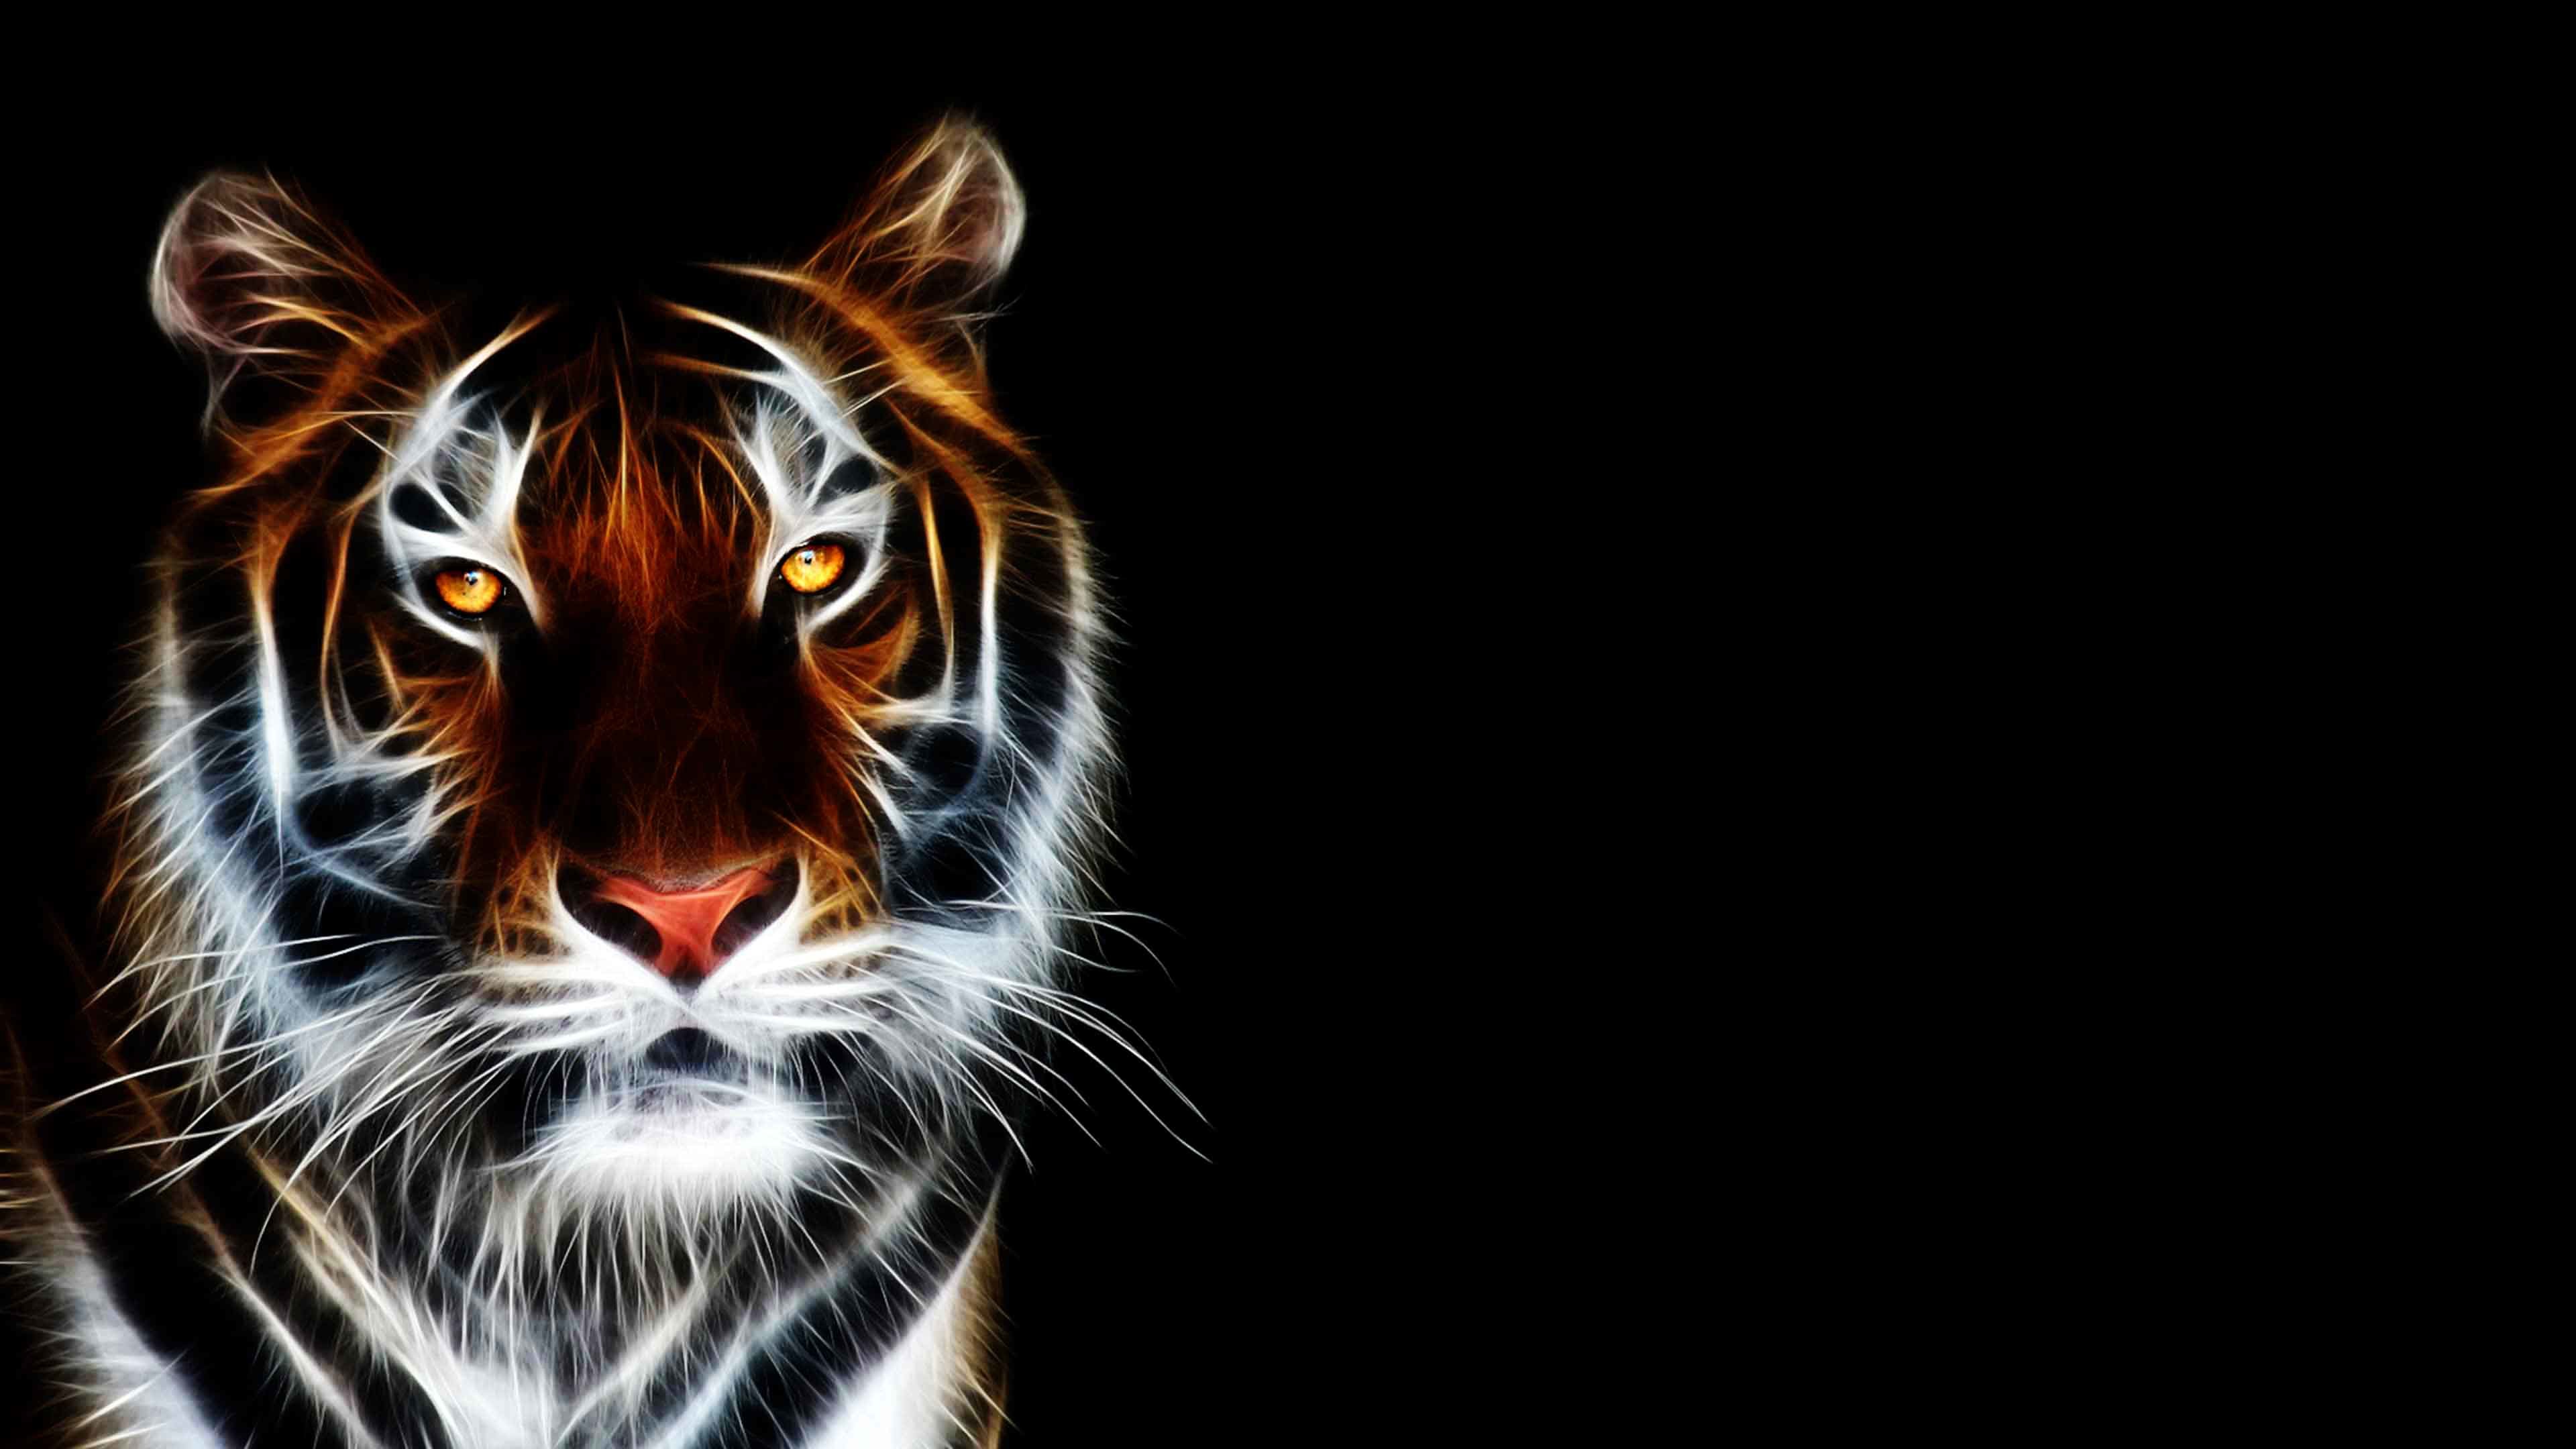 3840x2160 3d Animated Tiger Wallpapers - 3d wallpaper HD